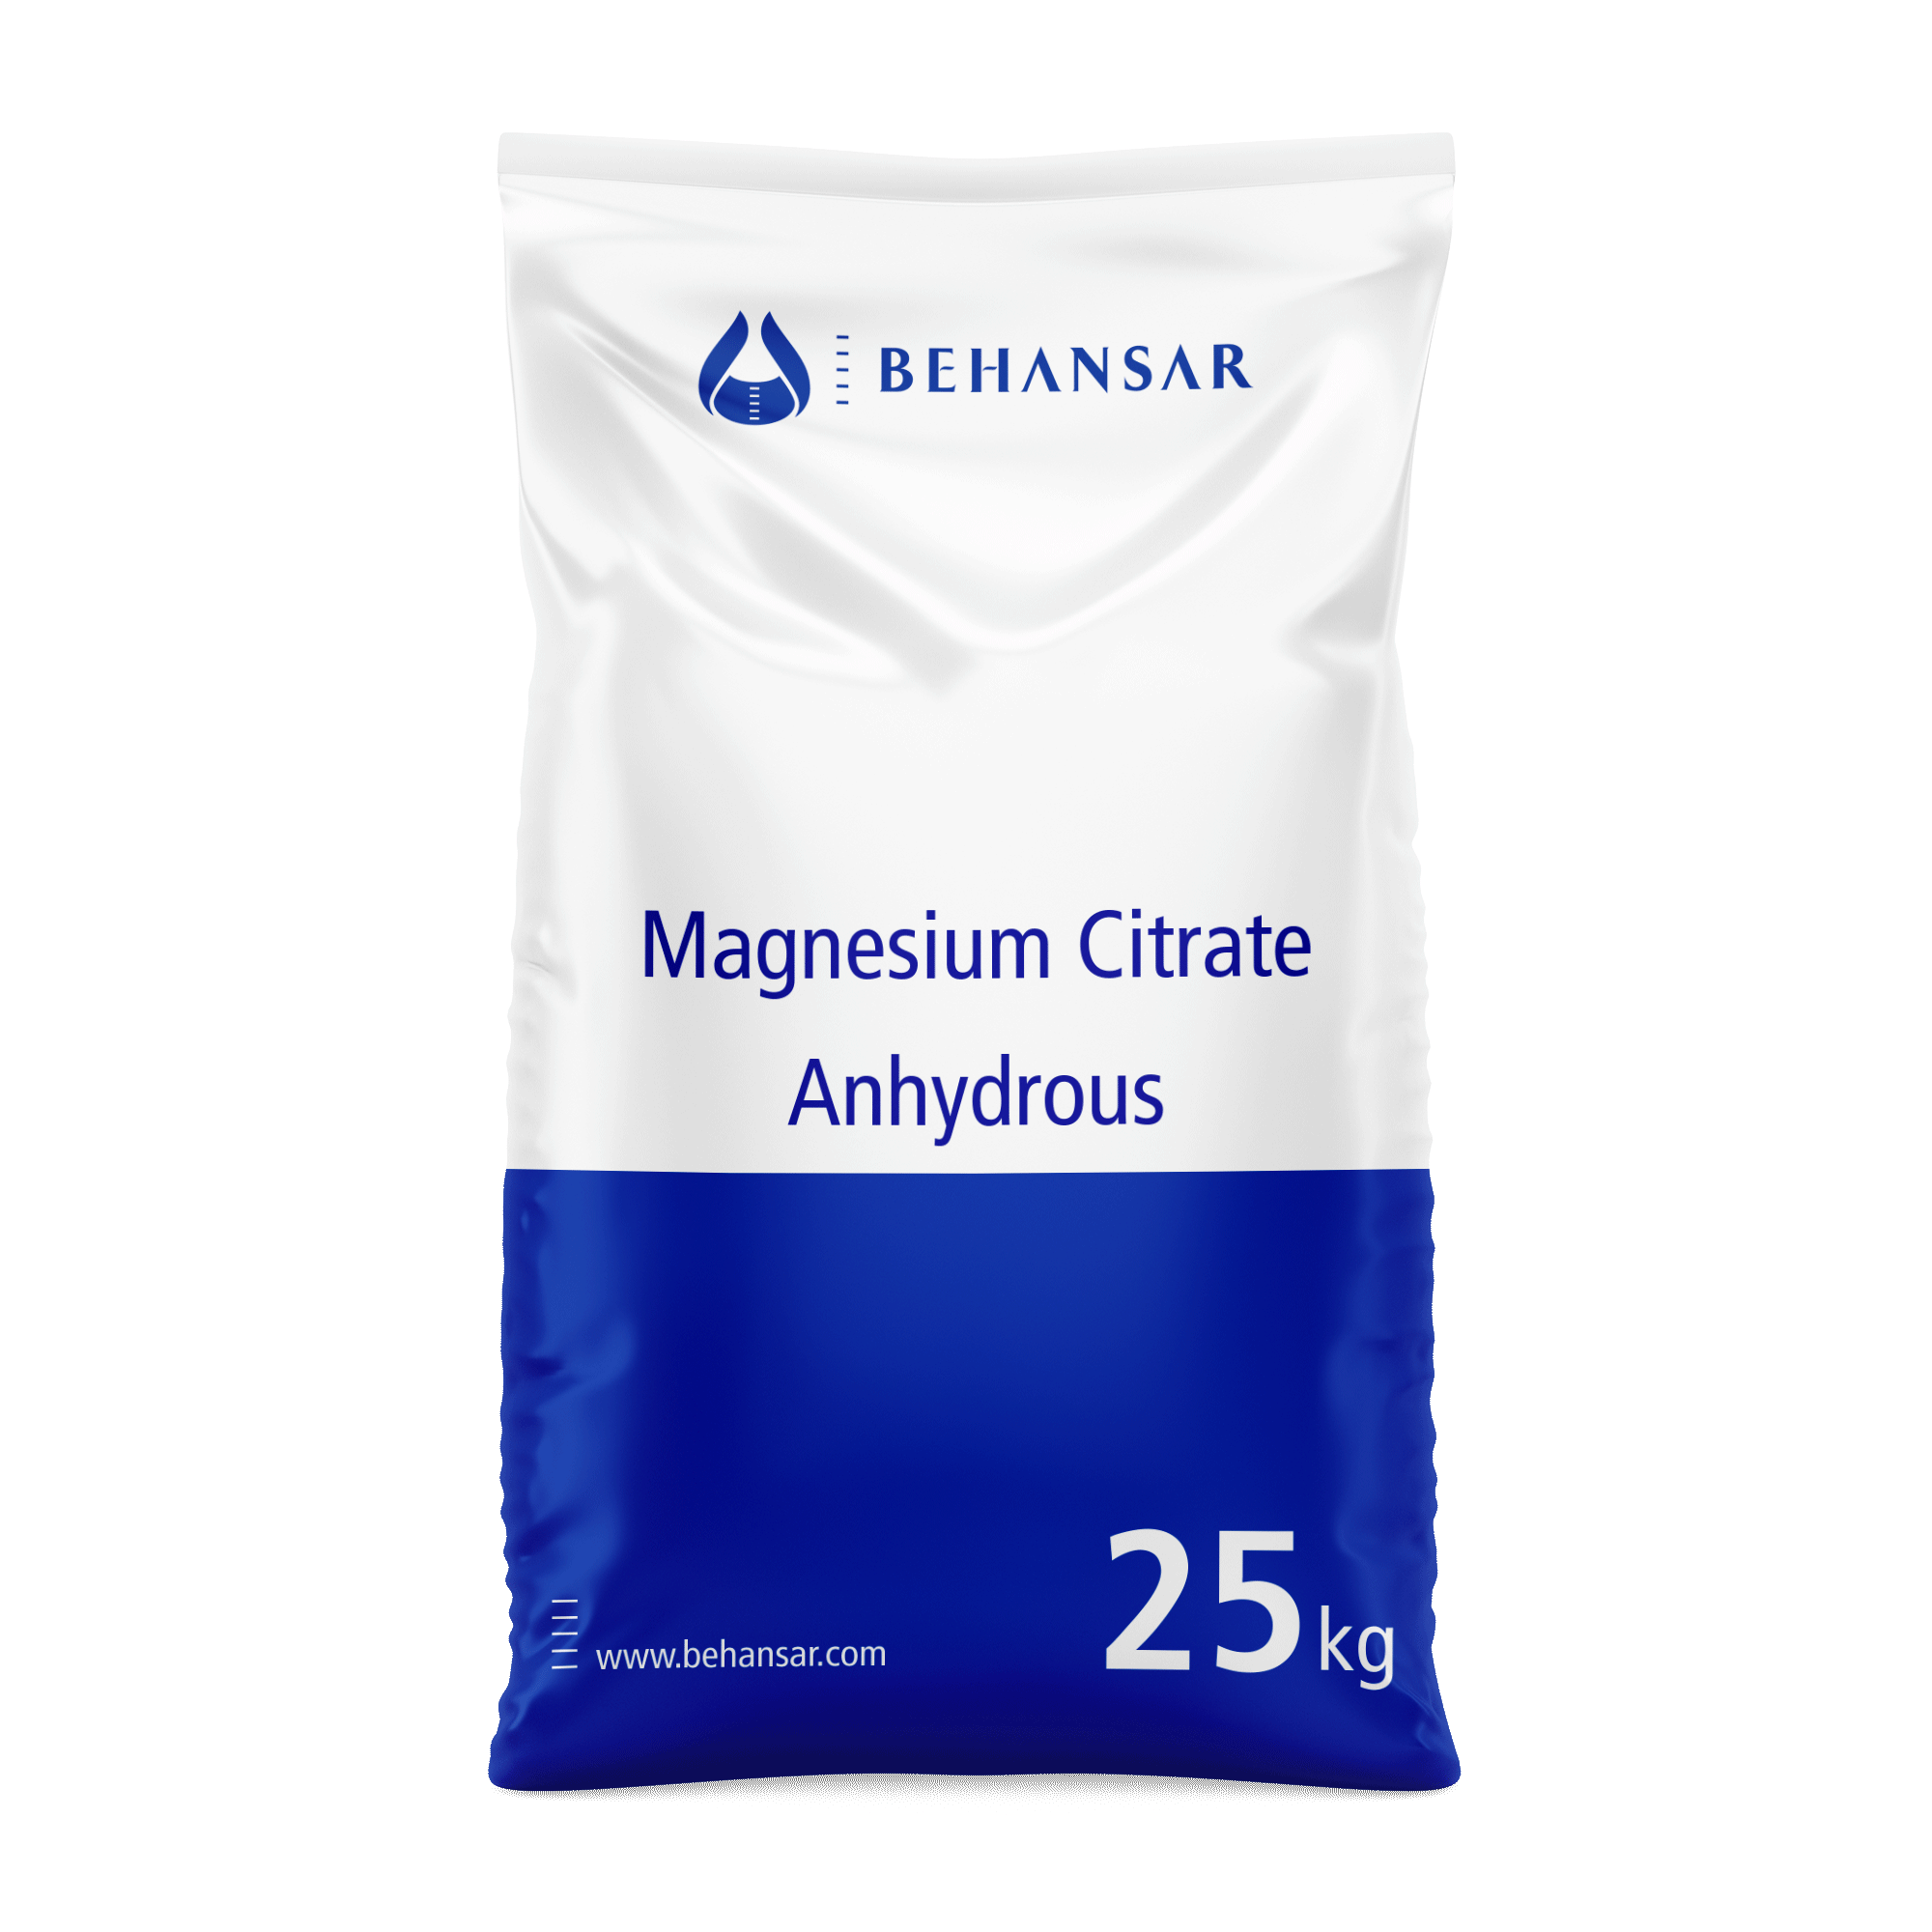 Magnesium Citrate Anhydrous is one of the products of Behansar Co